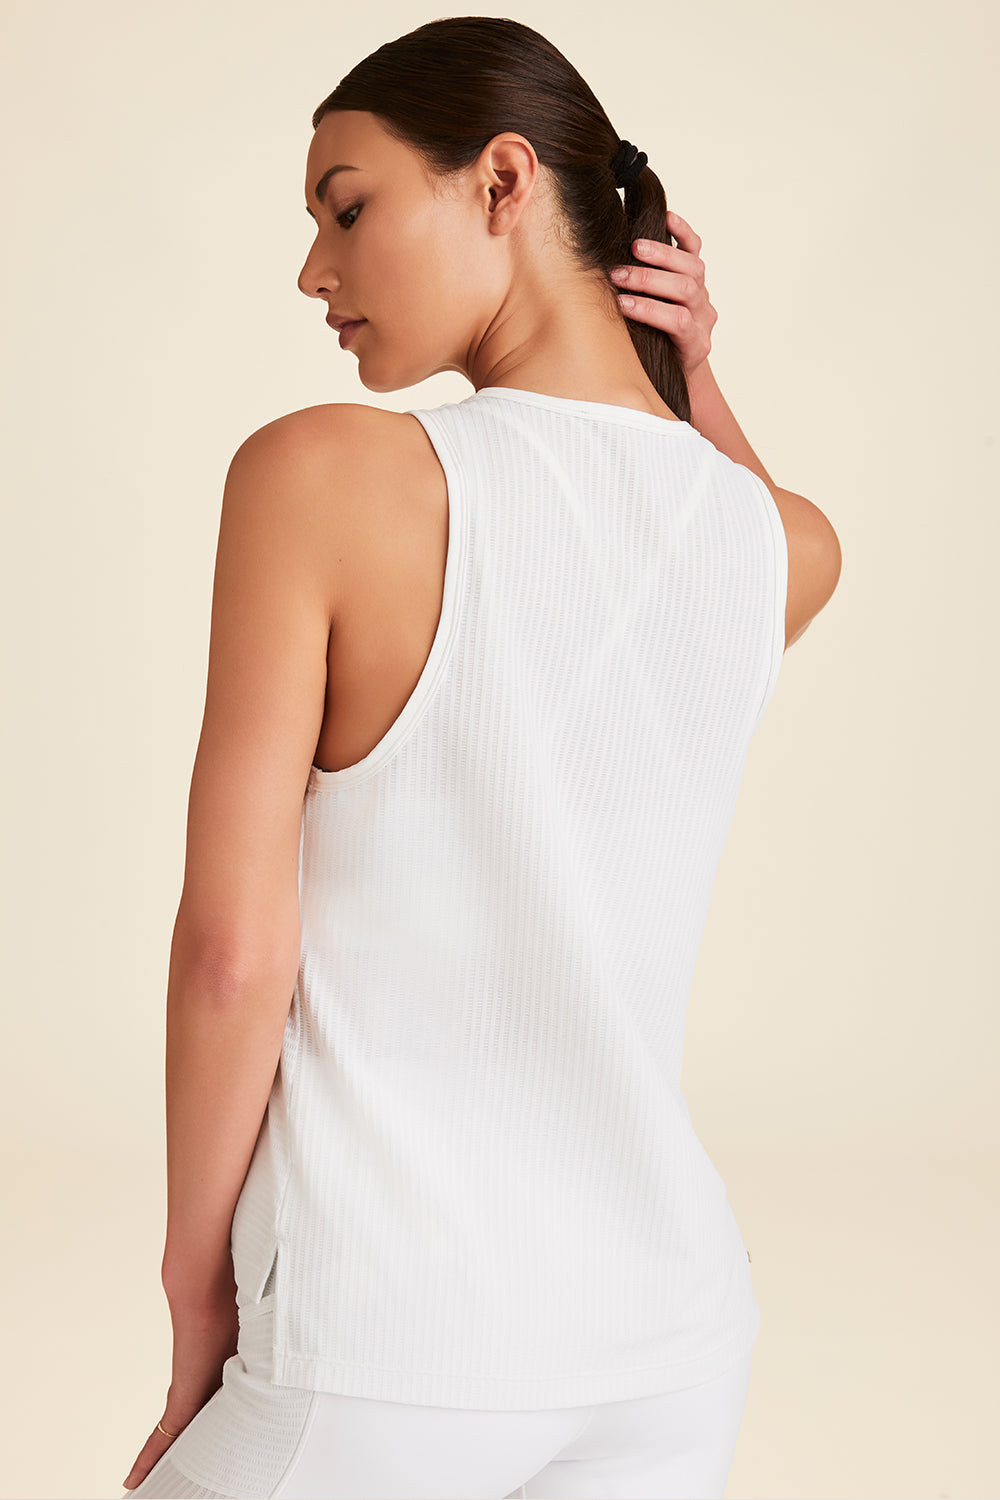 Closeup from back of woman modeling back of white Mirage Tank showing length and fit